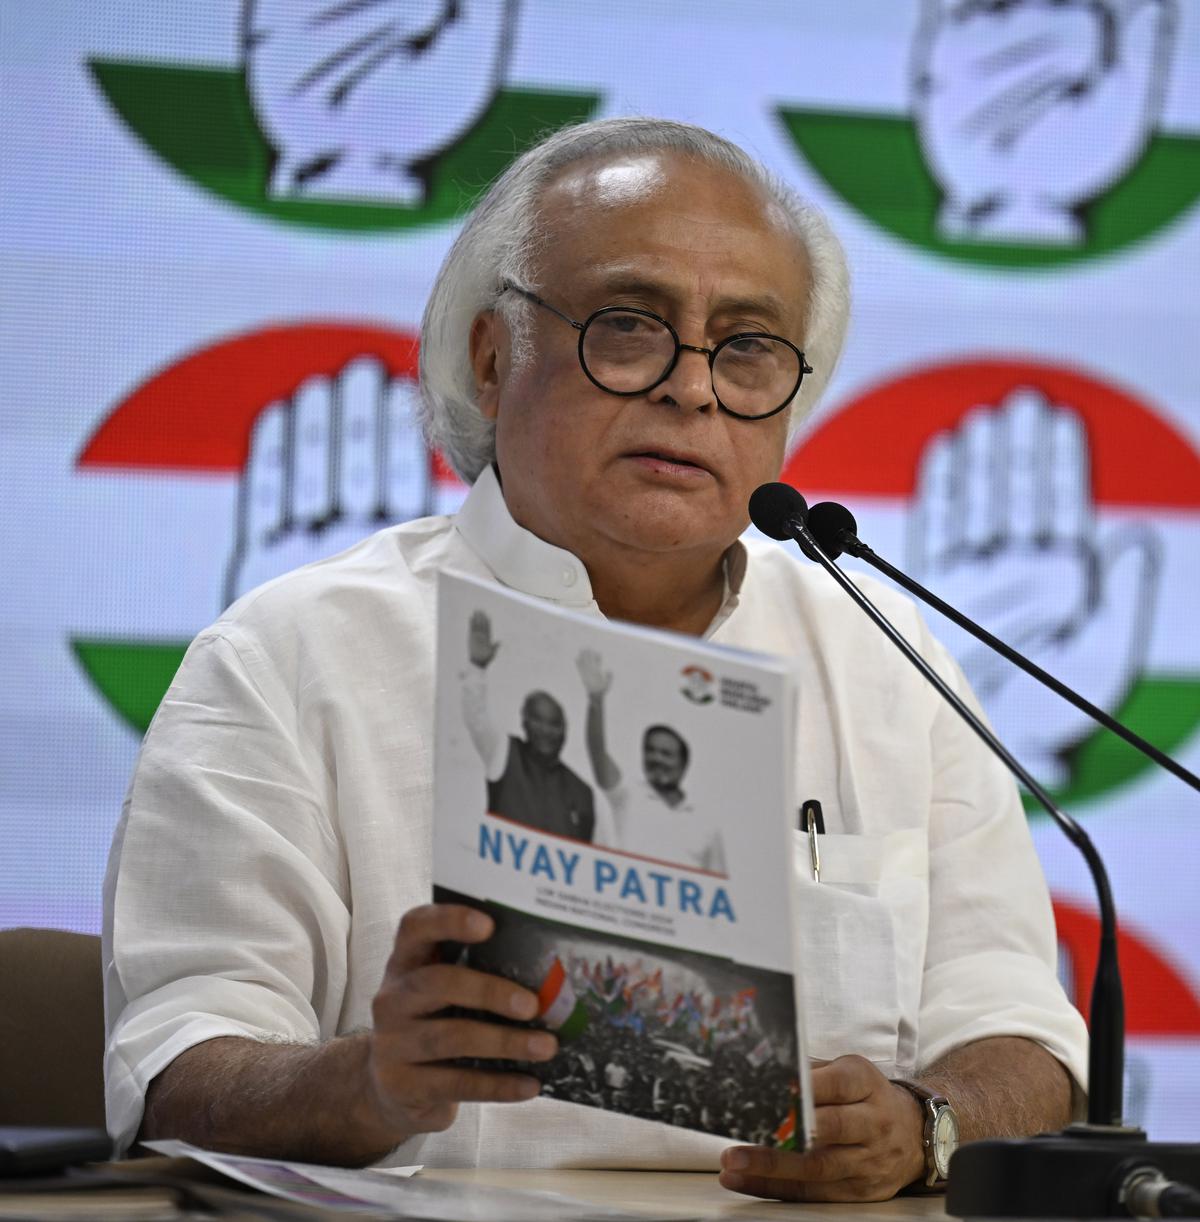 PM Taking Inspiration From Goebbels While Speaking About Cong Nyay Patra: Ramesh